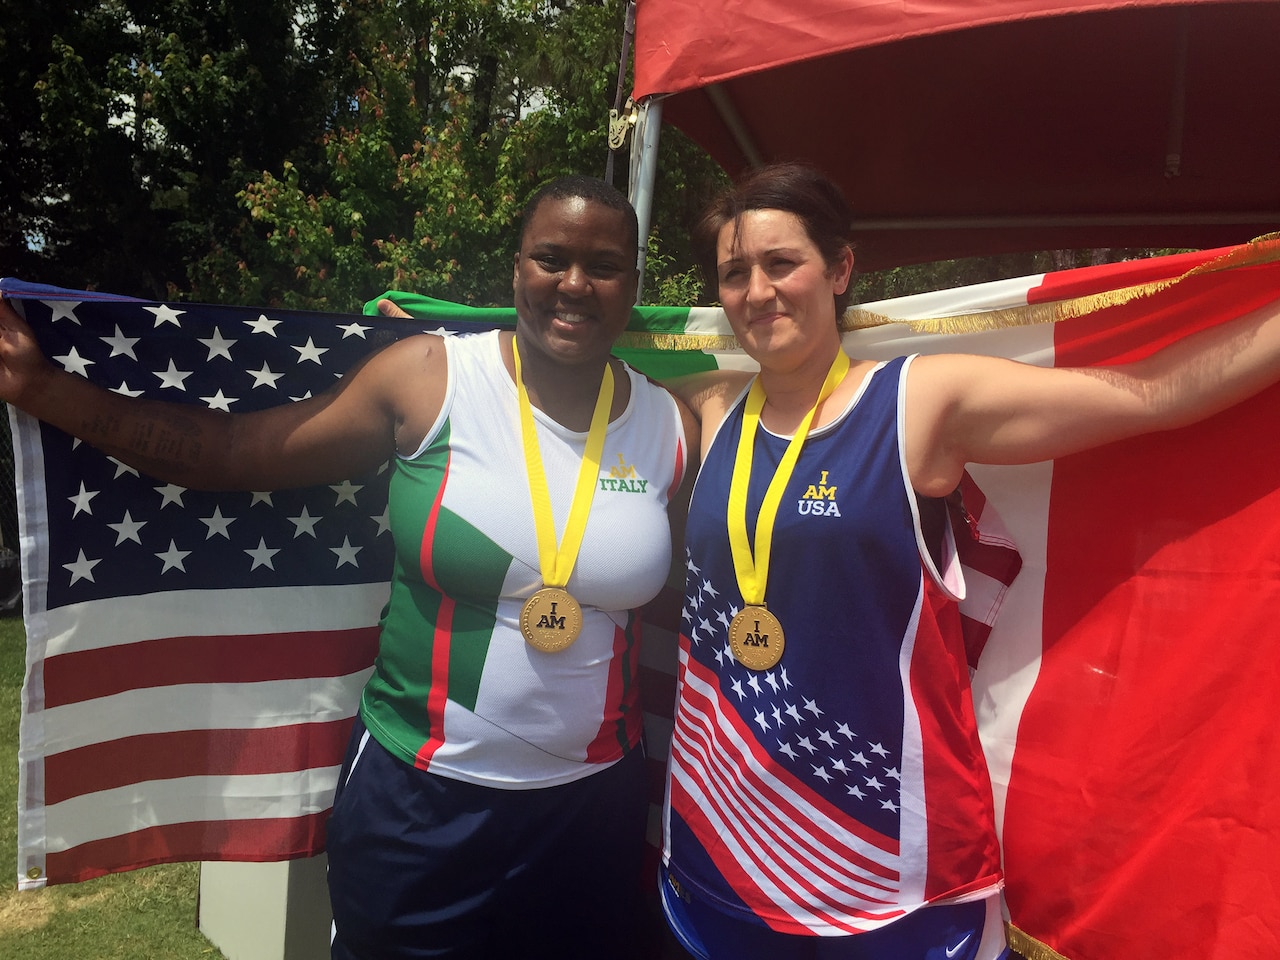 Medically retired Army Sgt. Monica Southall celebrates with 1st Maj. Cpl. Pellegrina Caputo of the Italian army after they both received gold medals in shot put in their respective disability categories during the track and field competition at the 2016 Invictus Games at the ESPN World Wide of Sports Complex at Walt Disney World, Orlando, Fla., May 10, 2016. Caputo asked Southall to trade jerseys to share in the camaraderie of the games, and she happily accepted. DoD photo by Shannon Collins